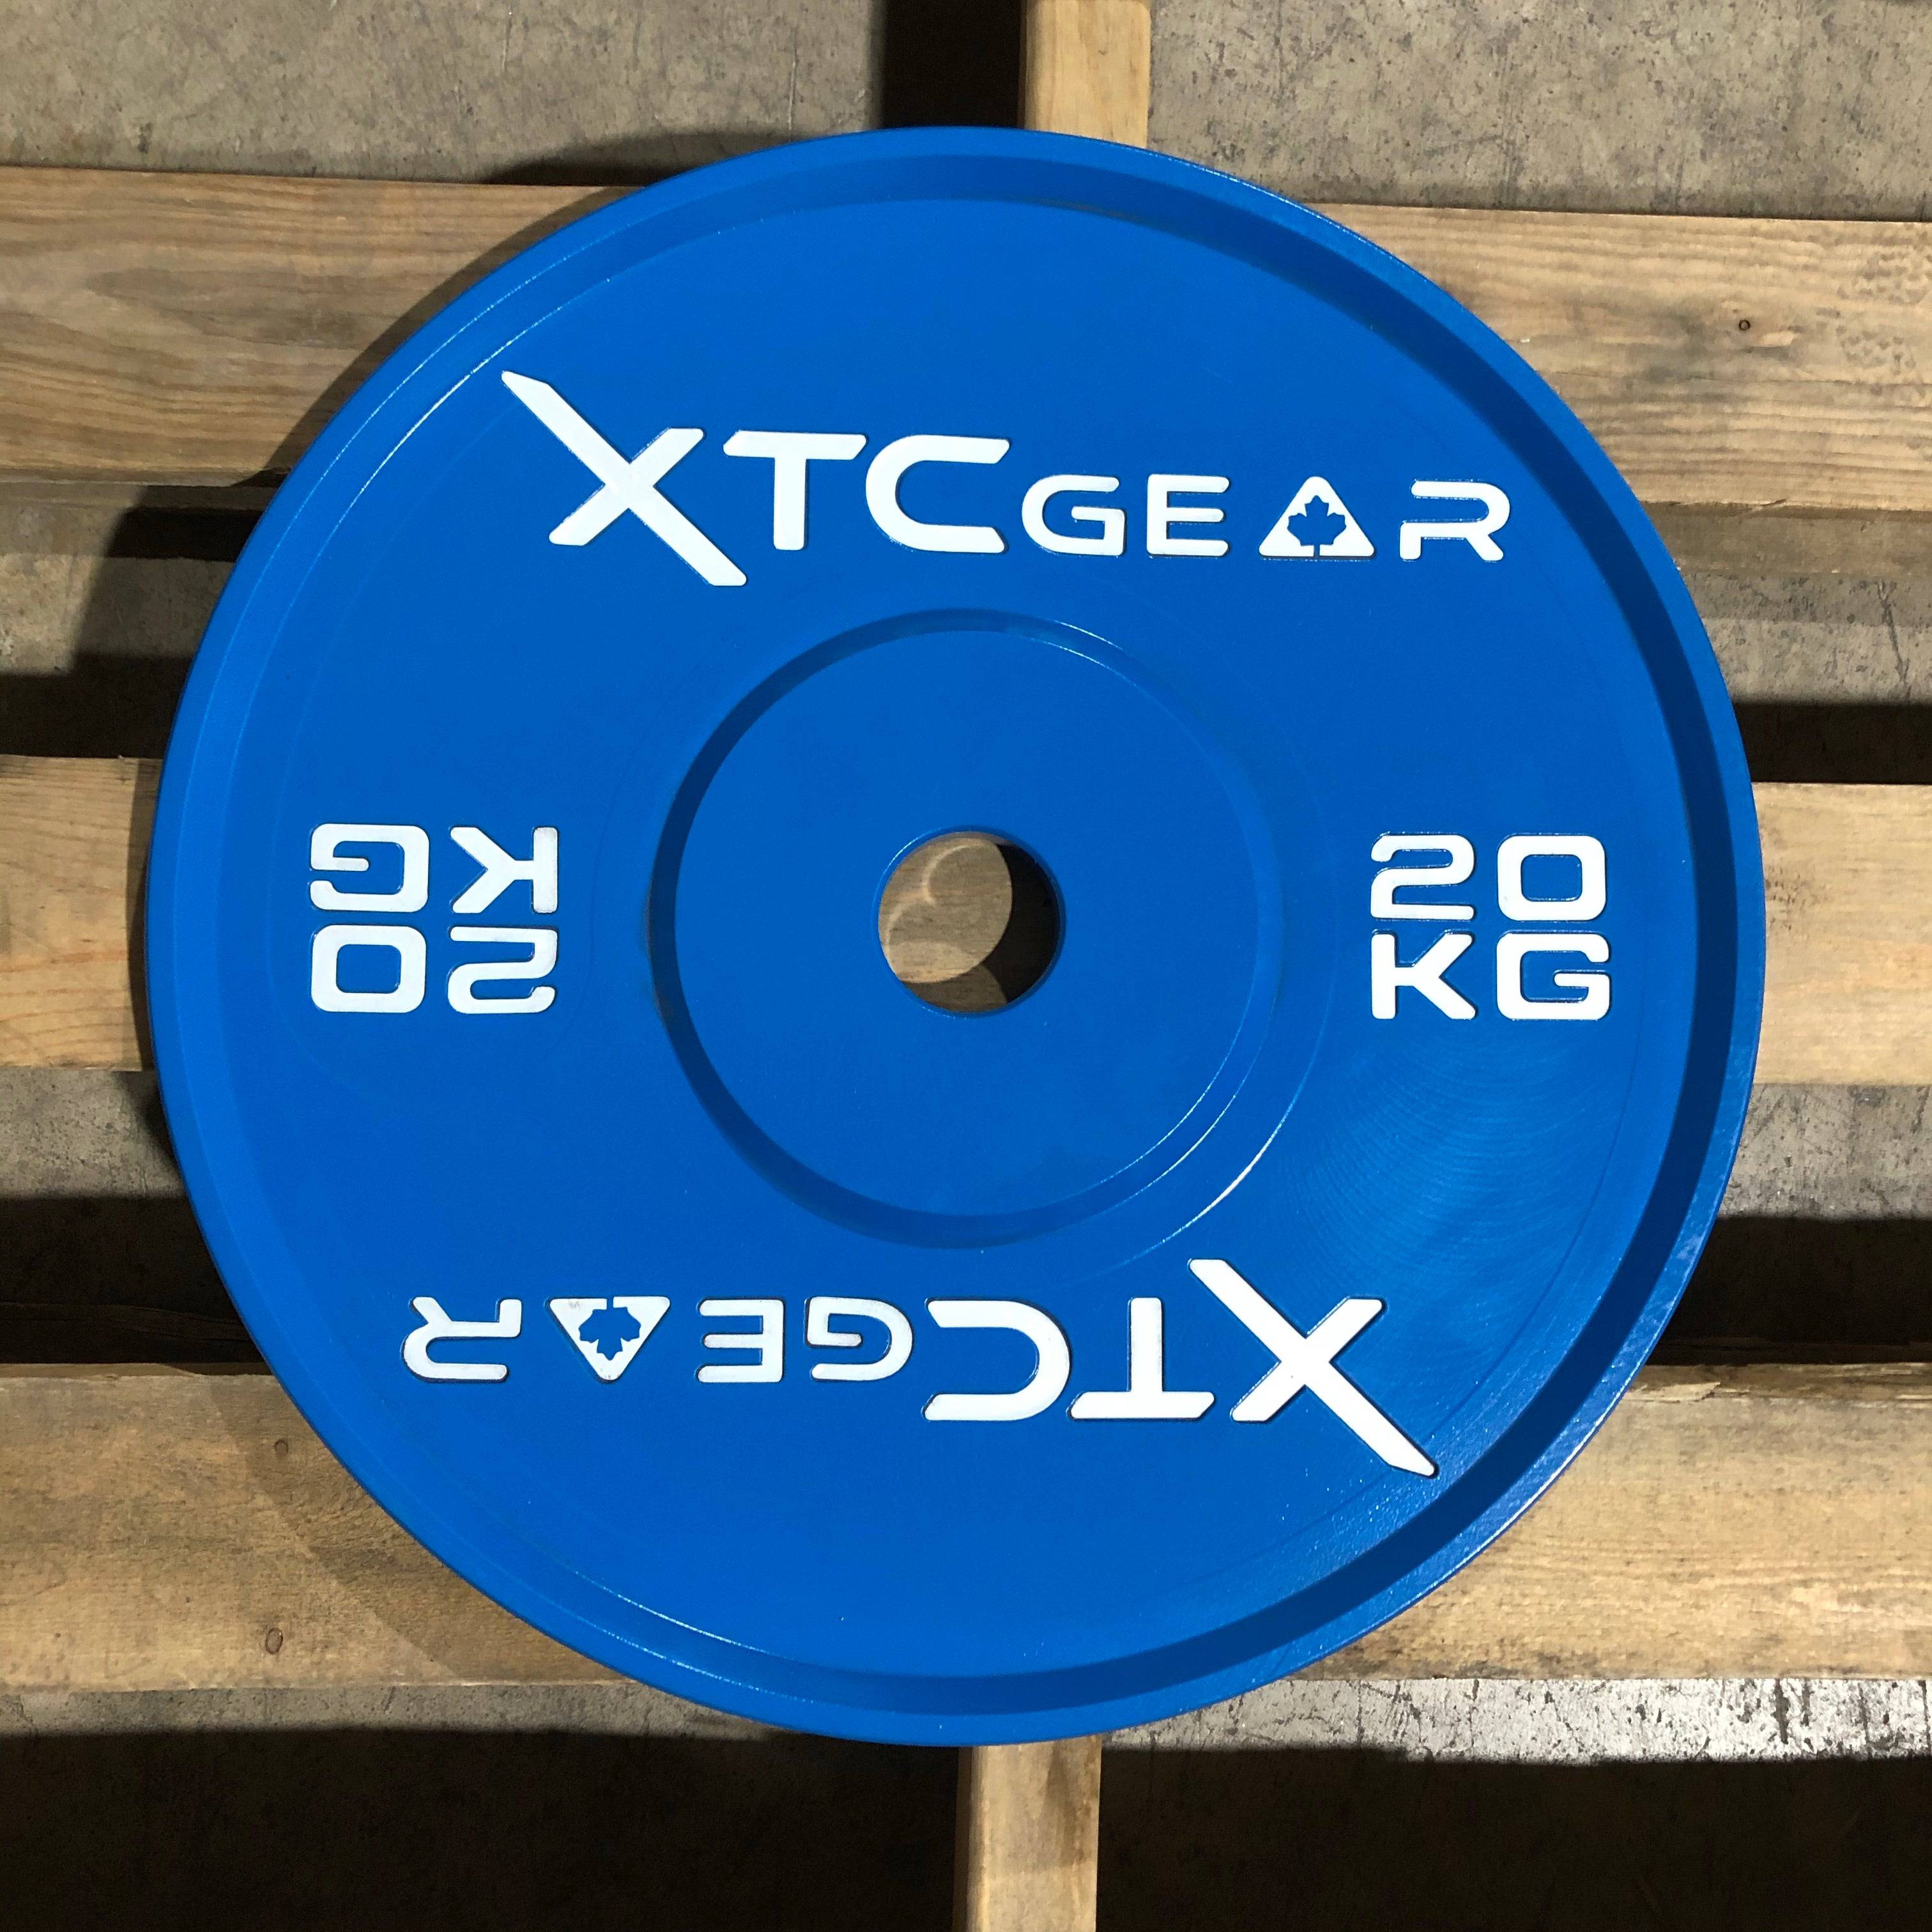 XTC Gear | X-Series IPF Spec Plates - Kilograms - XTC Fitness - Exercise Equipment Superstore - Canada - Calibrated Steel Plates